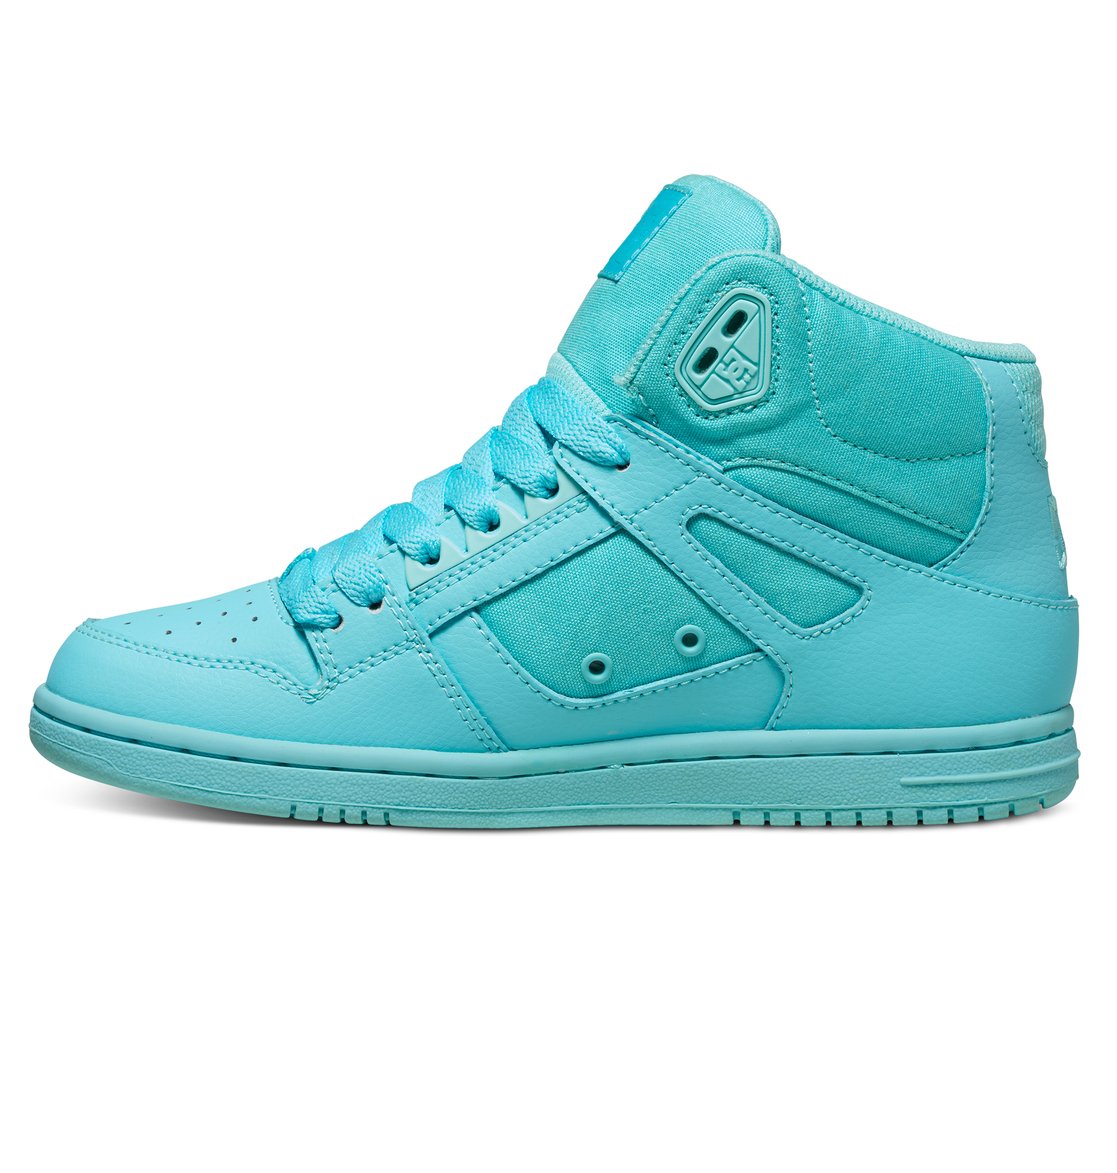 Women's Rebound High Shoes 302164 | DC Shoes